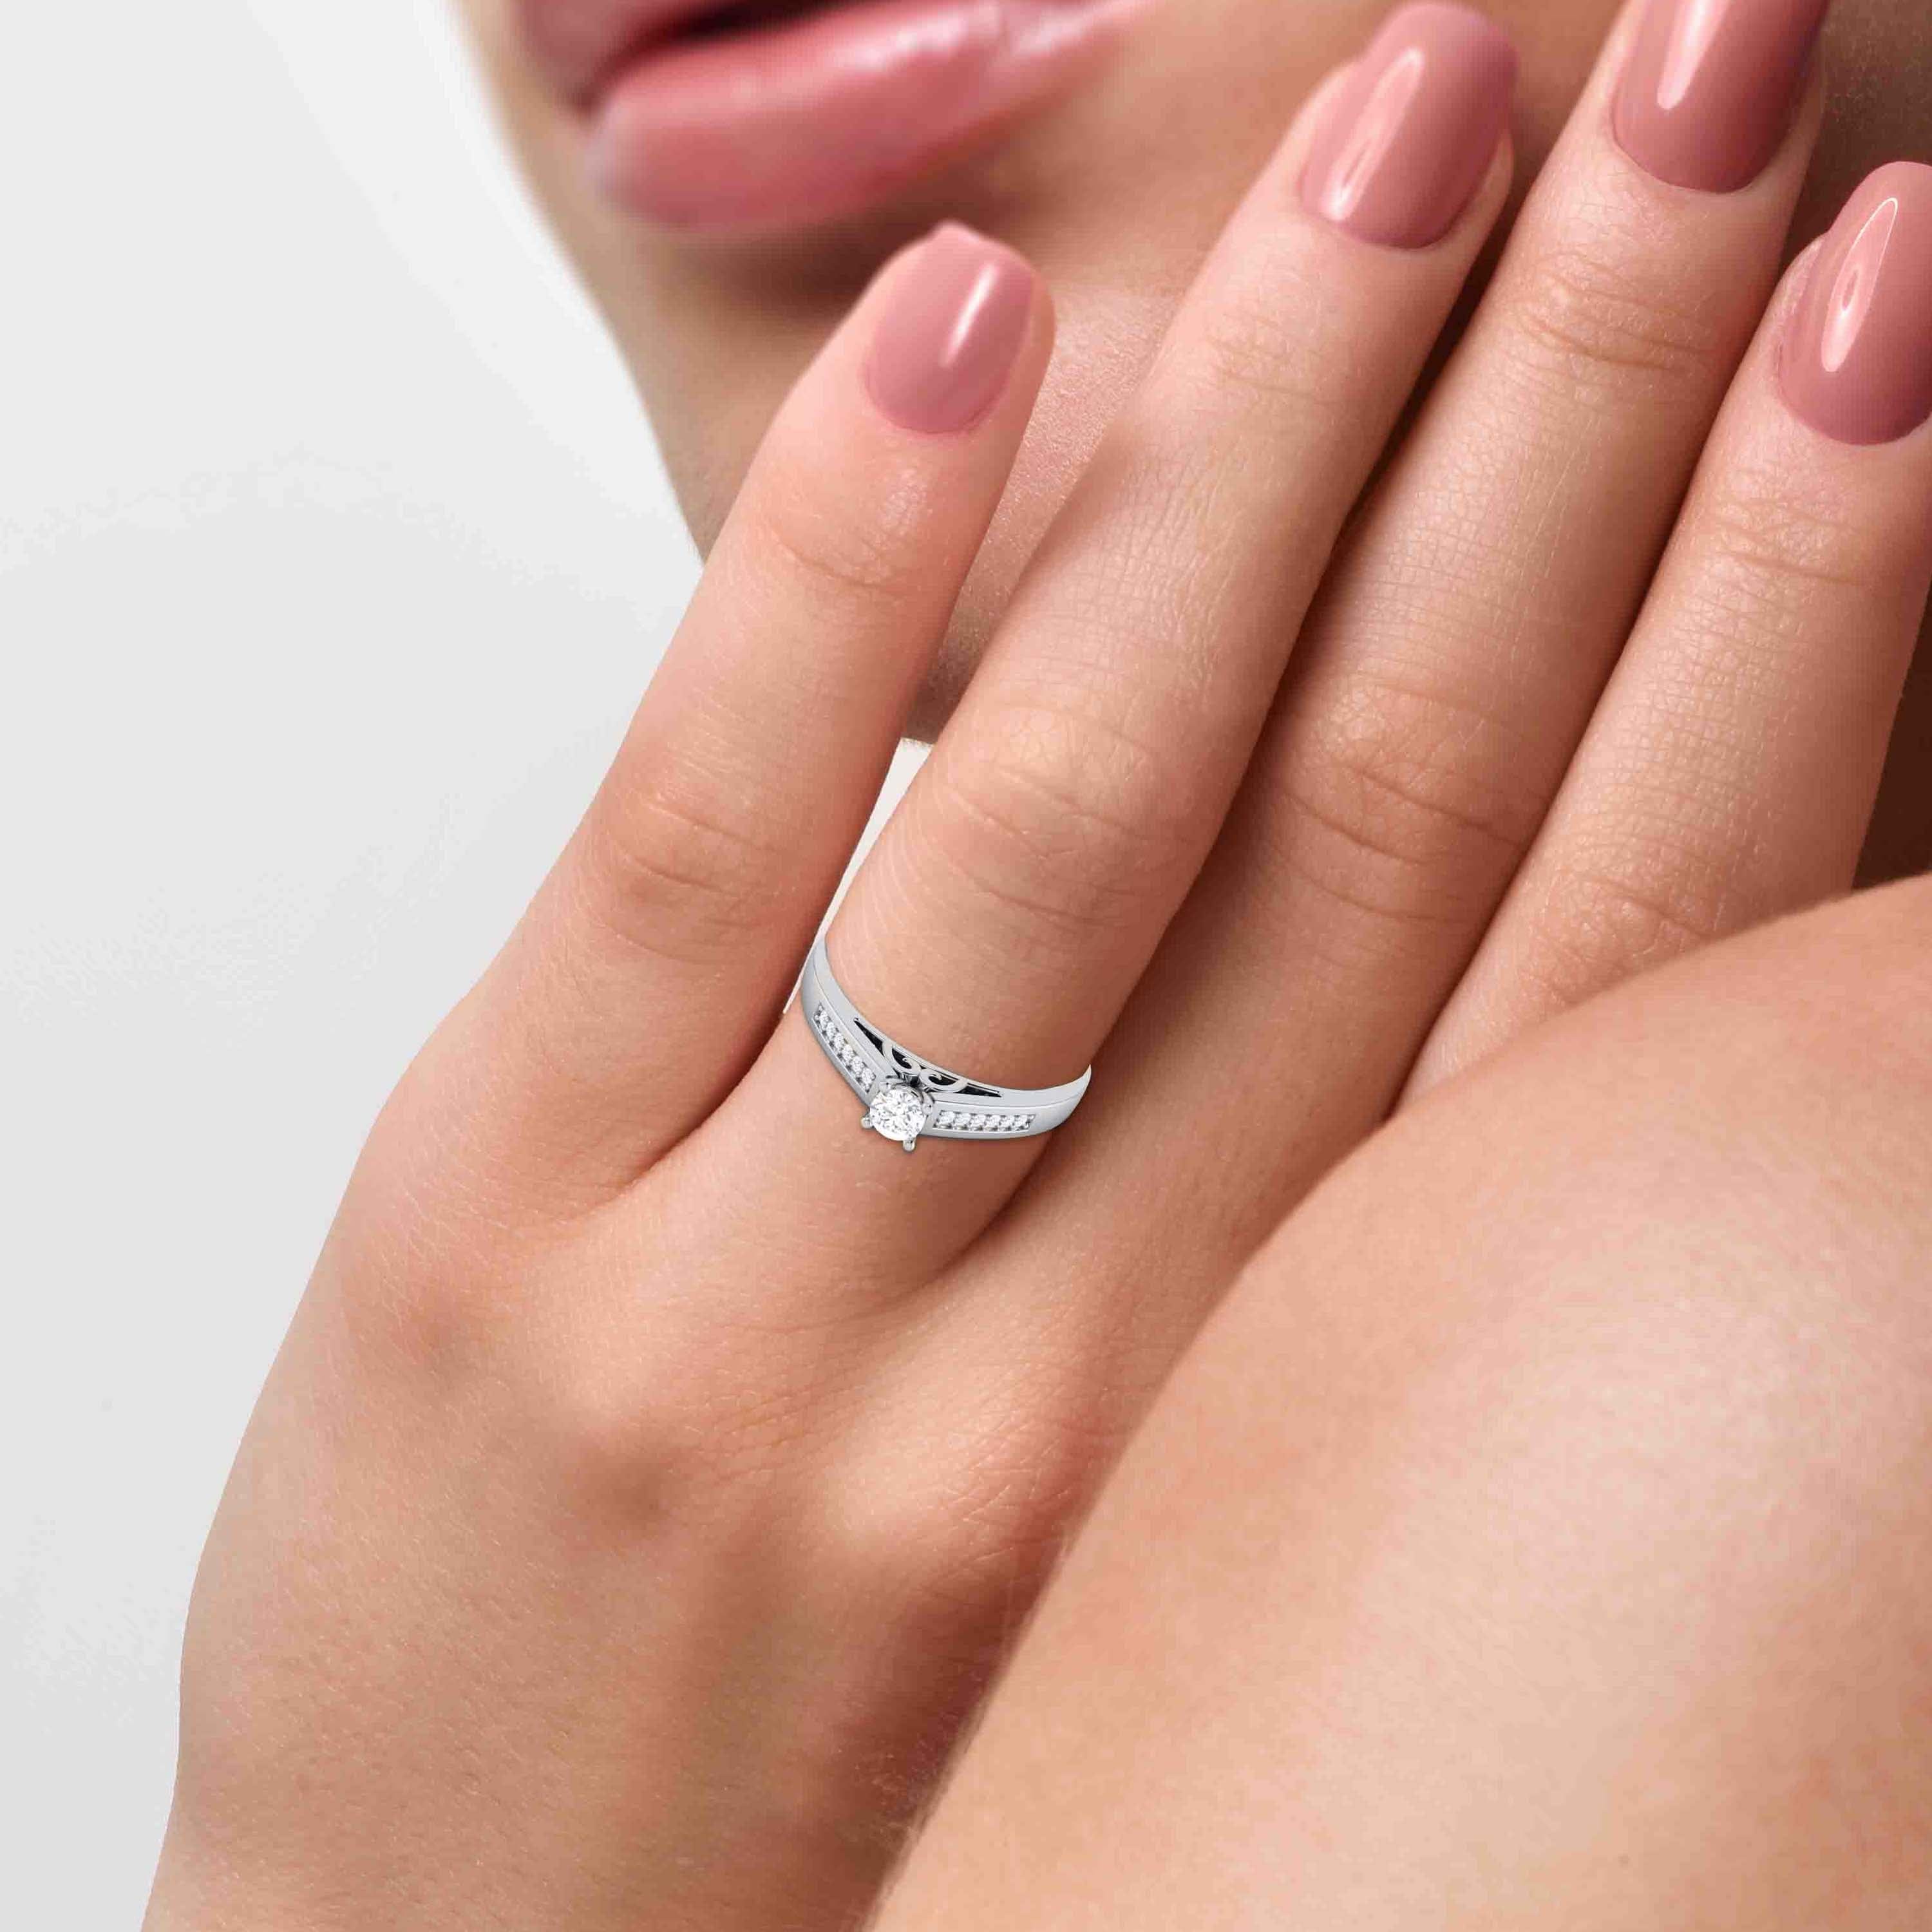 De Beers Jewellers Celebrates Love and Commitment with Striking New  Engagement Ring Designs – Harbour City